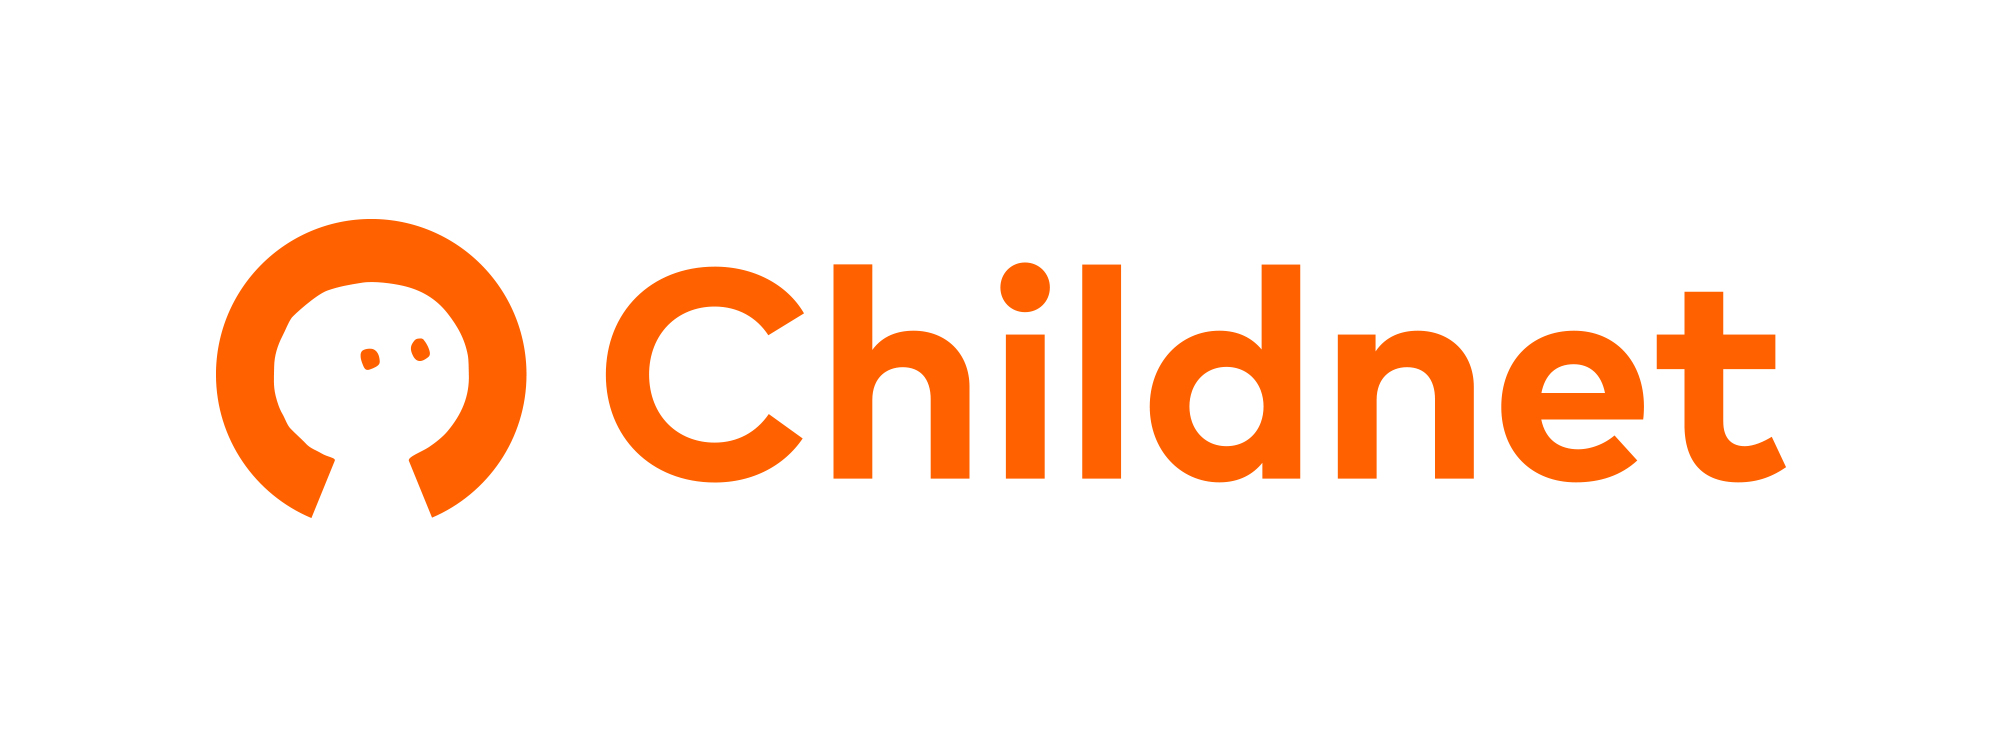 Childnet's new website and refreshed brand is unveiled! | Childnet